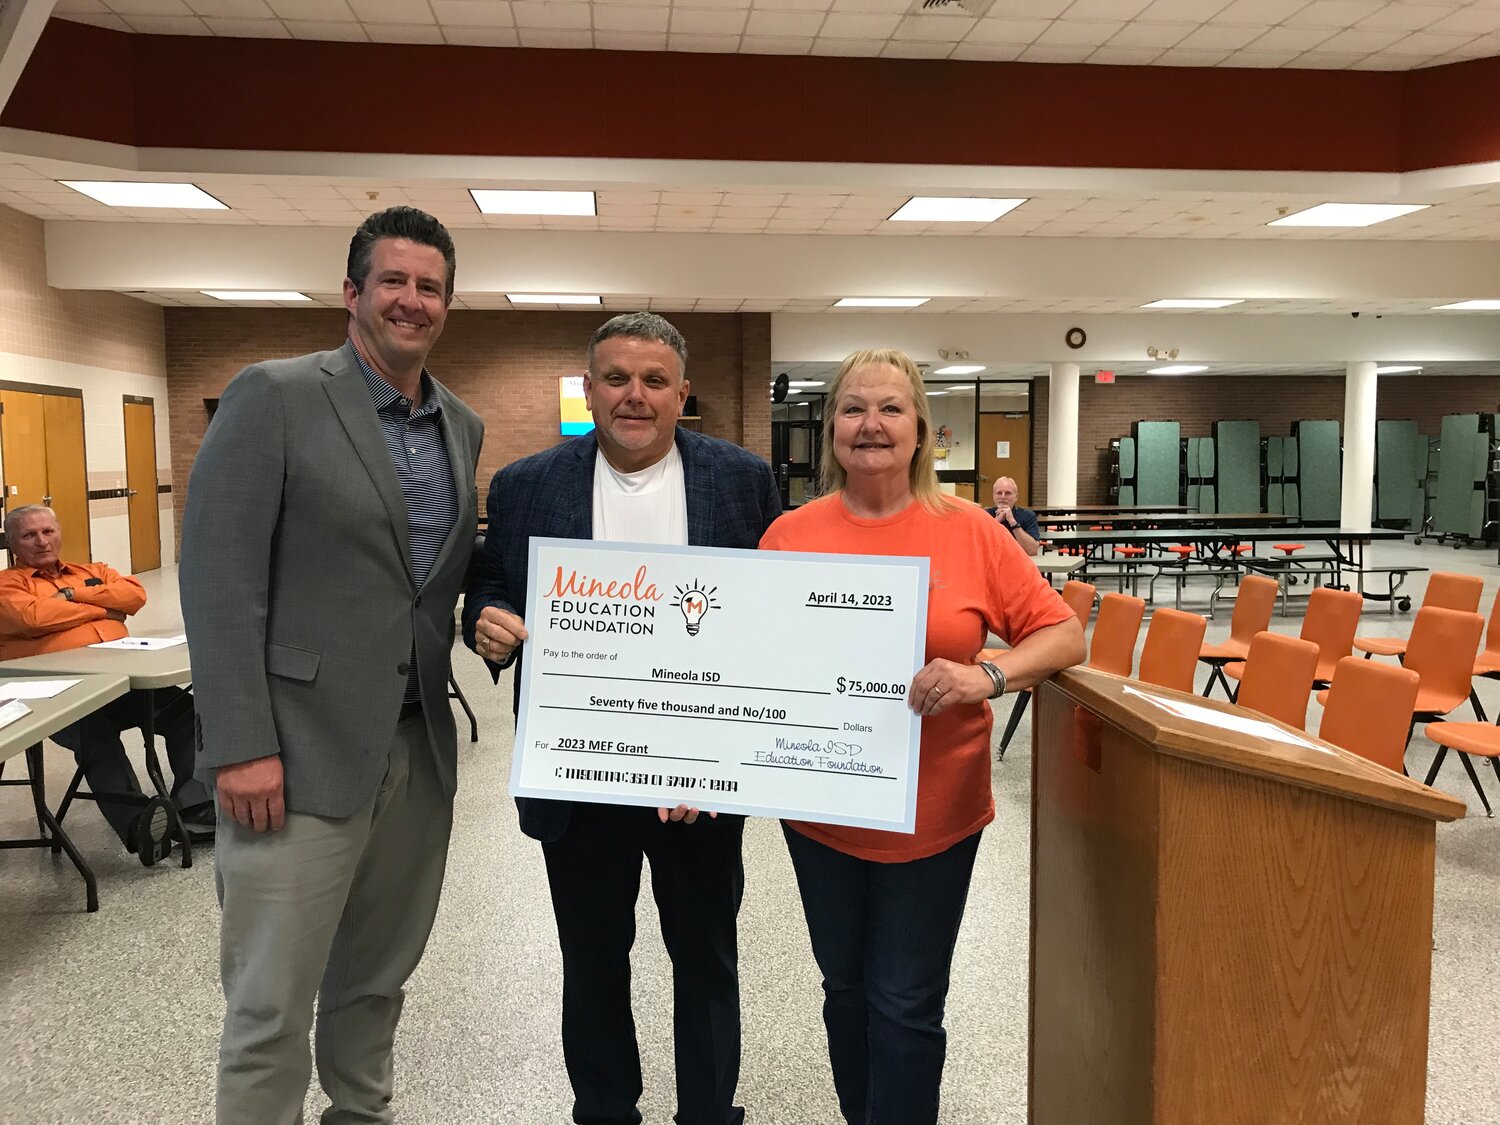 The Mineola ISD Education Foundation awarded $75,000 to the district Monday as the proceeds from the past year’s fundraising efforts. Foundation President Jason Ray, left, and Martha Holmes awarded the funds to School Board Vice President Rodney Watkins Monday night. Holmes noted this brings the total for seven years to $265,000 in teacher grants. This year’s will be awarded in the next few weeks. The first year in 2017 the foundation raised $15,000 for grants.